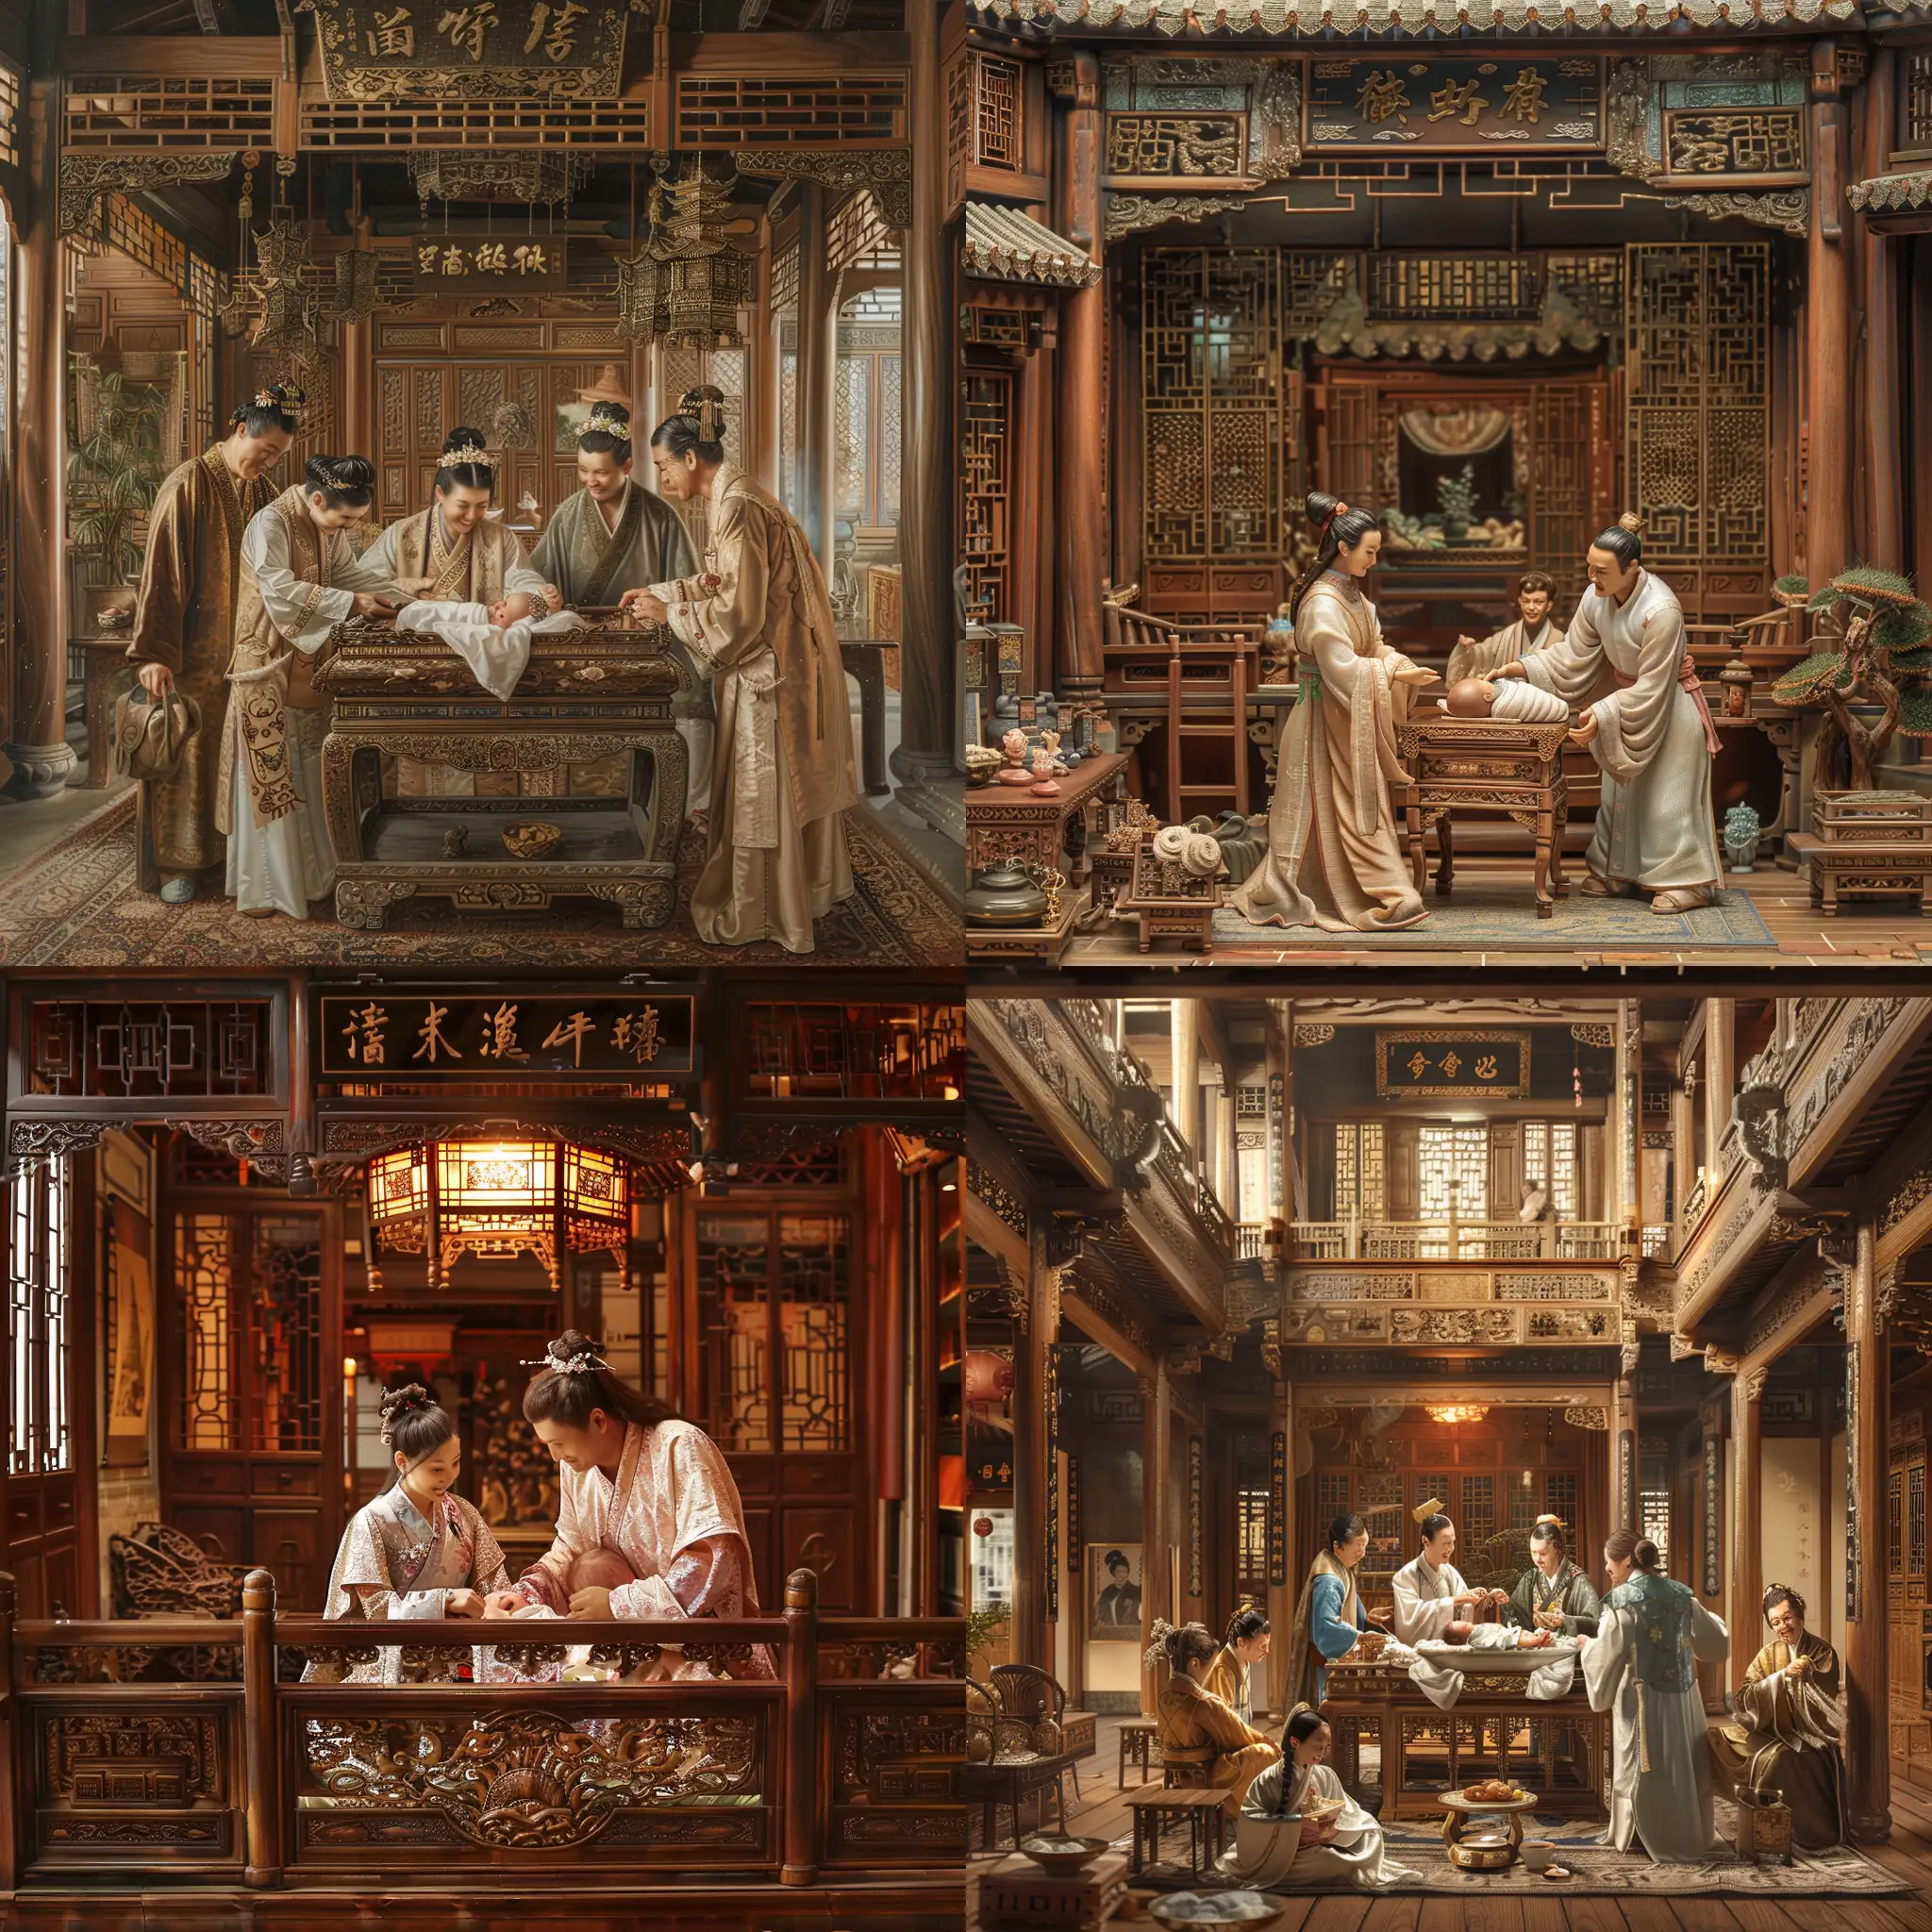 A warm and joyful depiction of a traditional Chinese family from the Tang Dynasty in Guangdong's Shunde district, celebrating the birth of a newborn baby in their ancestral home. The interior setting showcases classical Chinese aesthetics, with intricate wooden architecture and ornate decorations typical of the era. The scene radiates happiness and grandiosity, capturing the harmonious spirit of the family occasion.